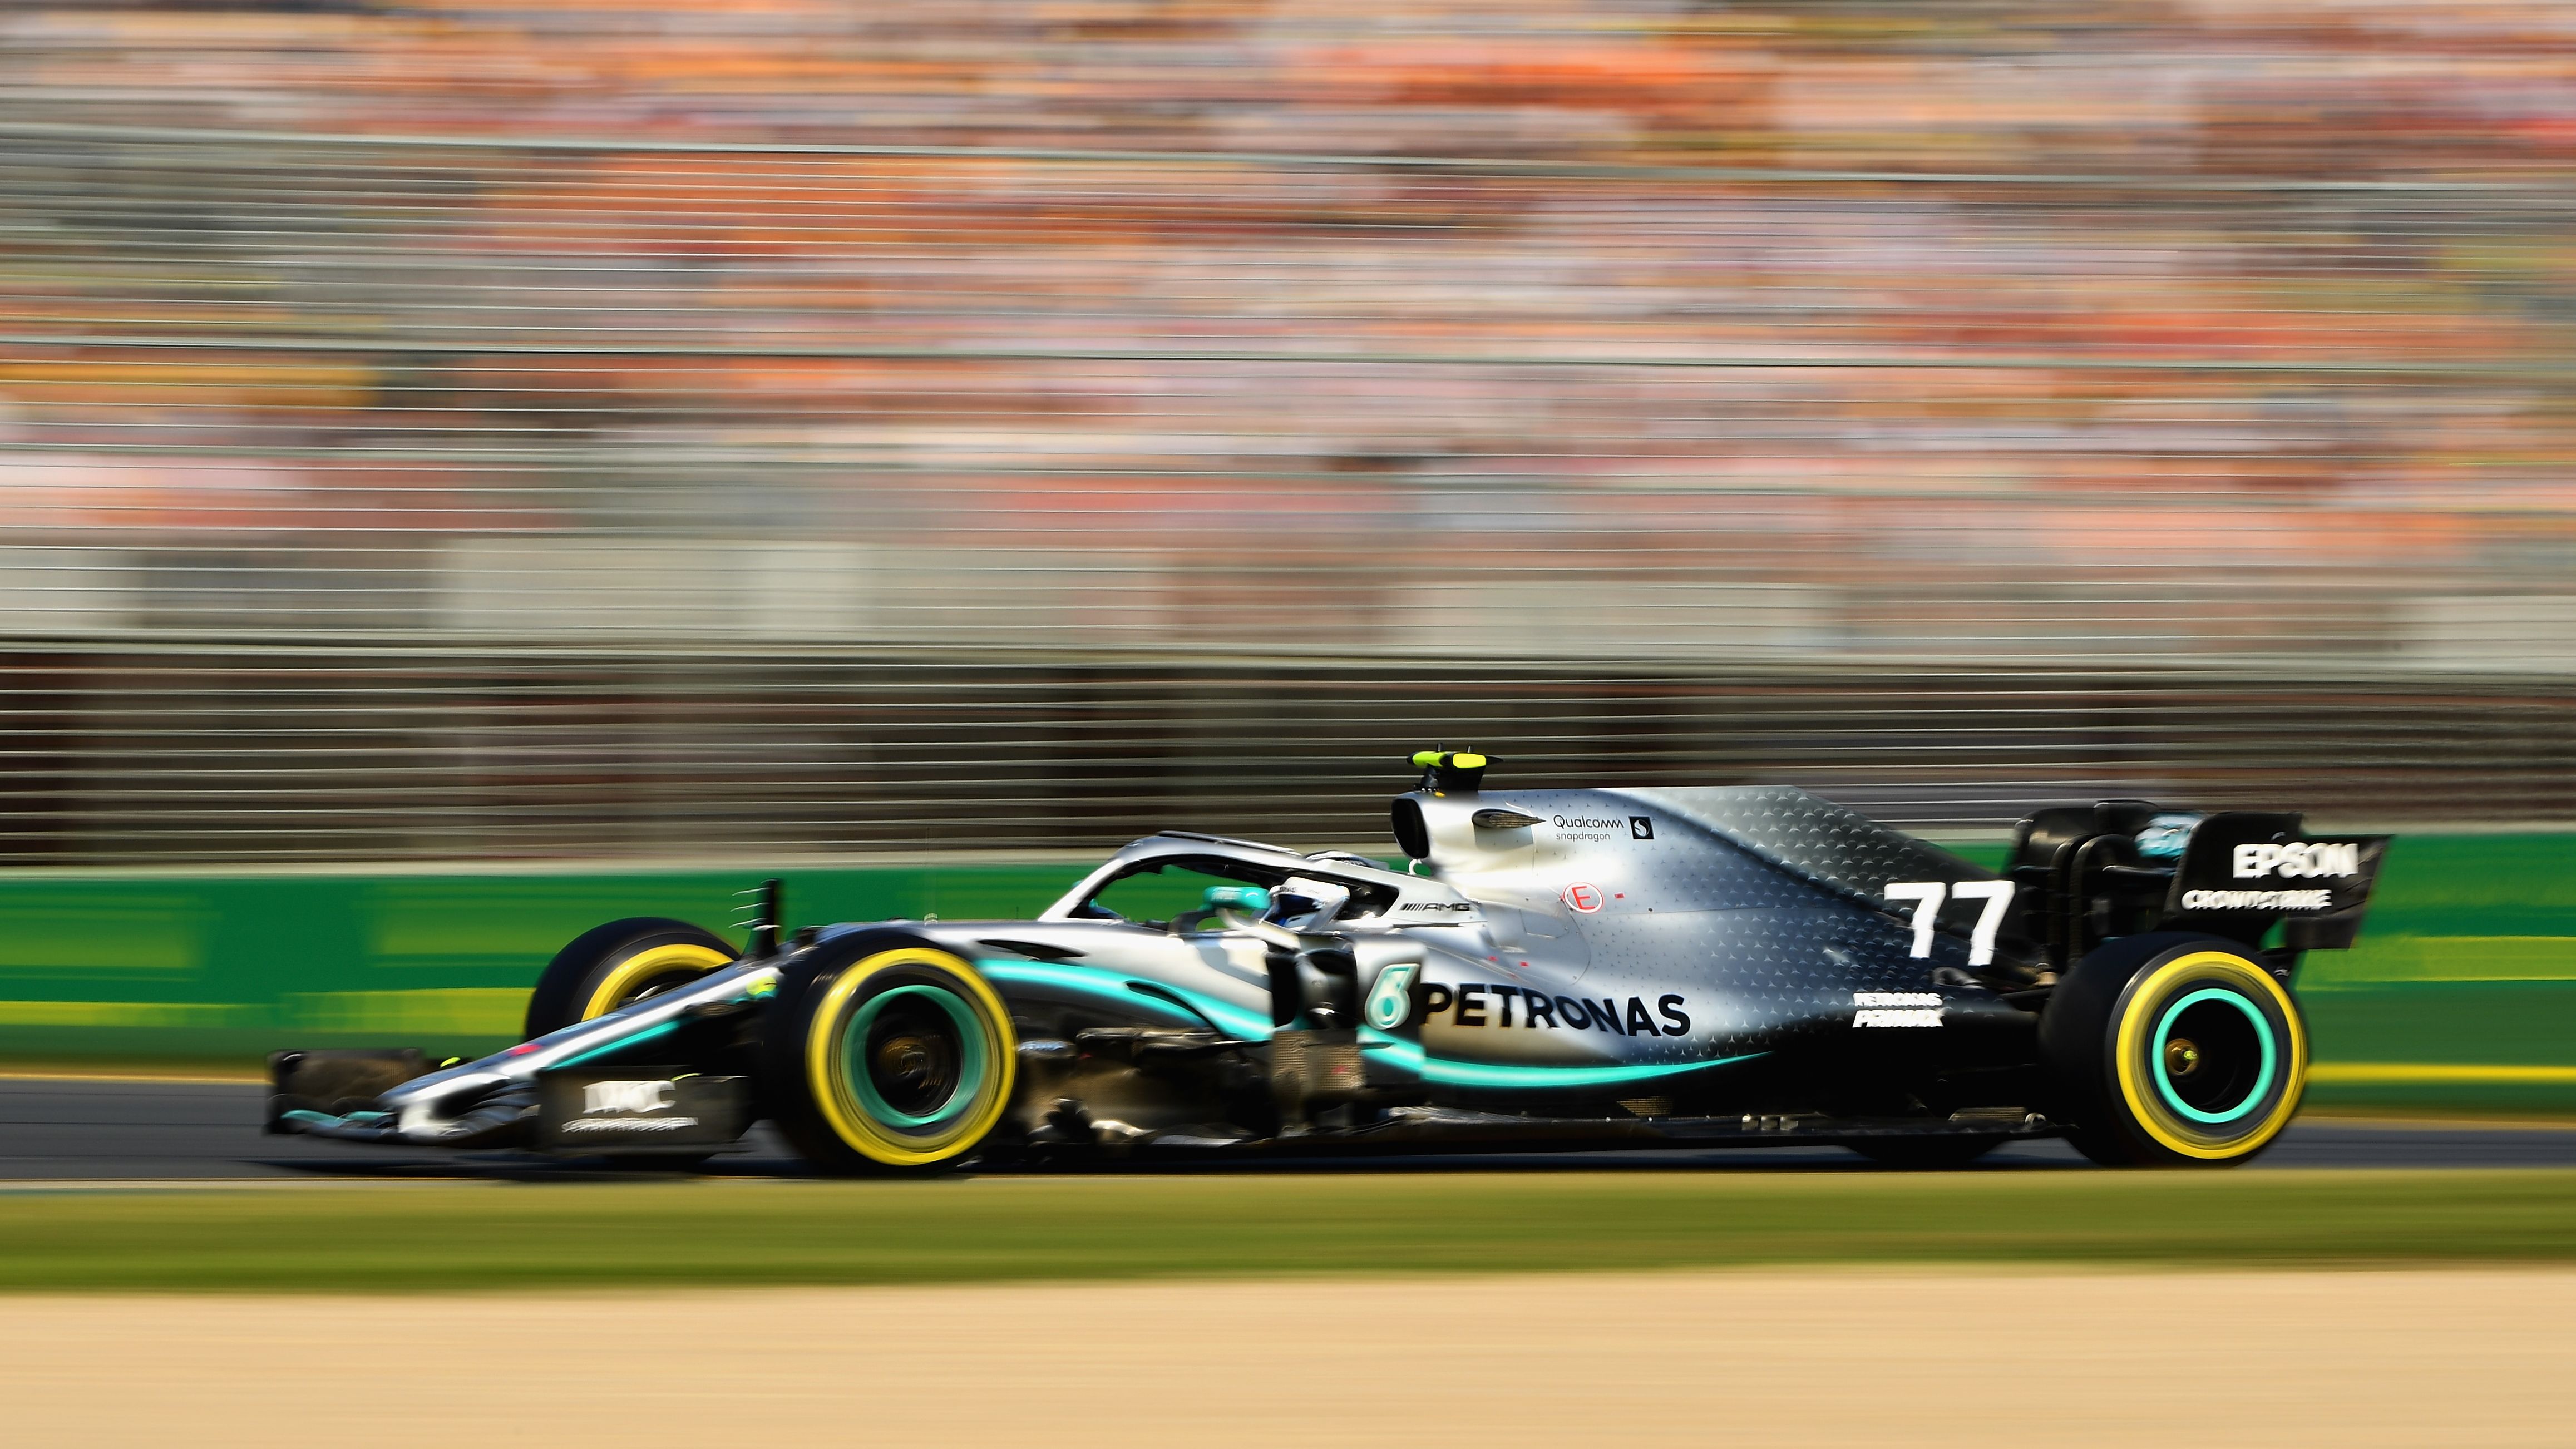 Valtteri Bottas won by more than 20 seconds in Melbourne.